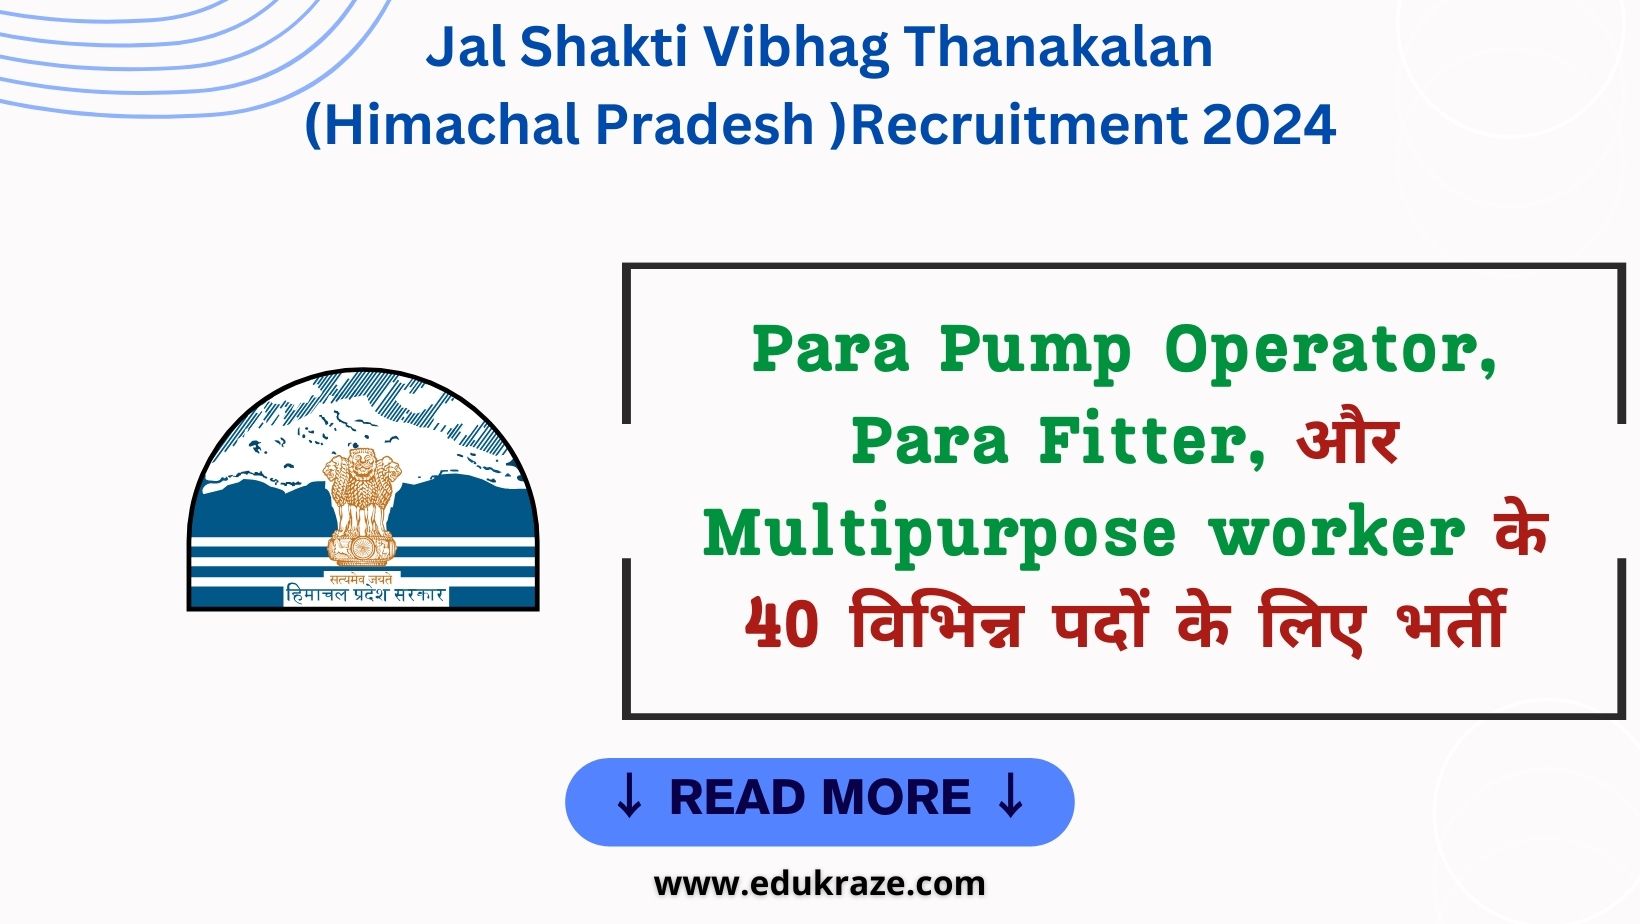 HP Jal Shakti Vibhag Division Thanakalan is hiring for Para Pump Operator, Para Fitter, and Multipurpose Worker positions. Apply before 15 February 2024. Check eligibility and application details here!